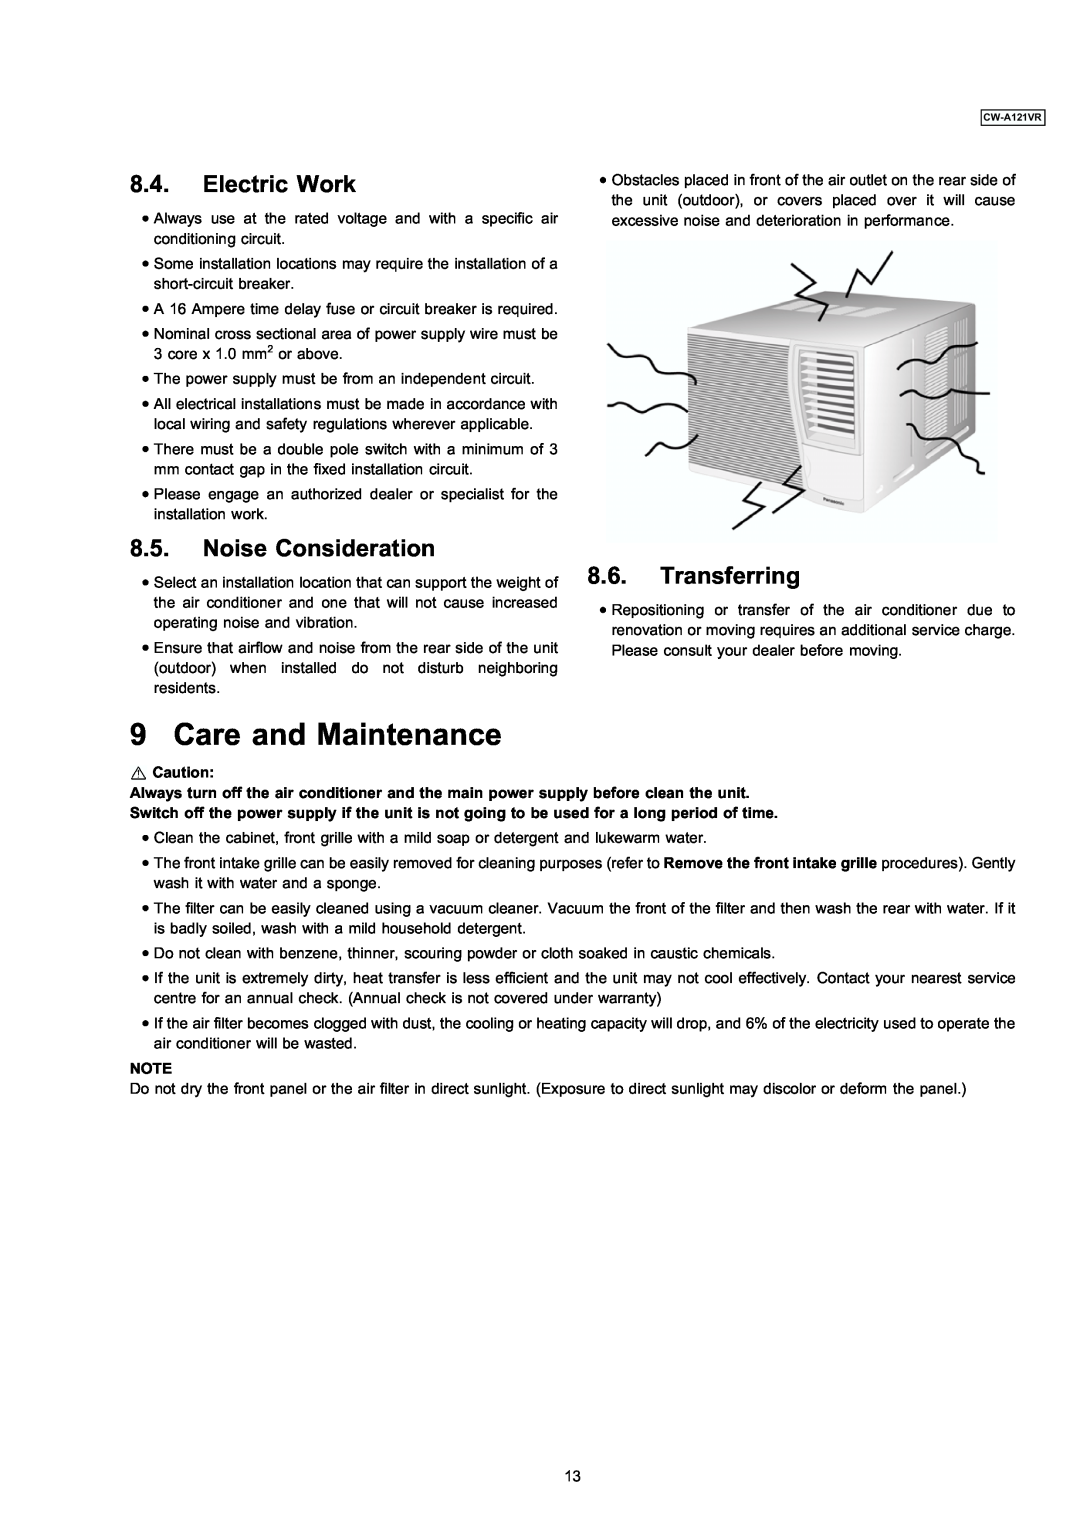 Panasonic CW-A121VR manual Care and Maintenance, Electric Work, Noise Consideration, Transferring 